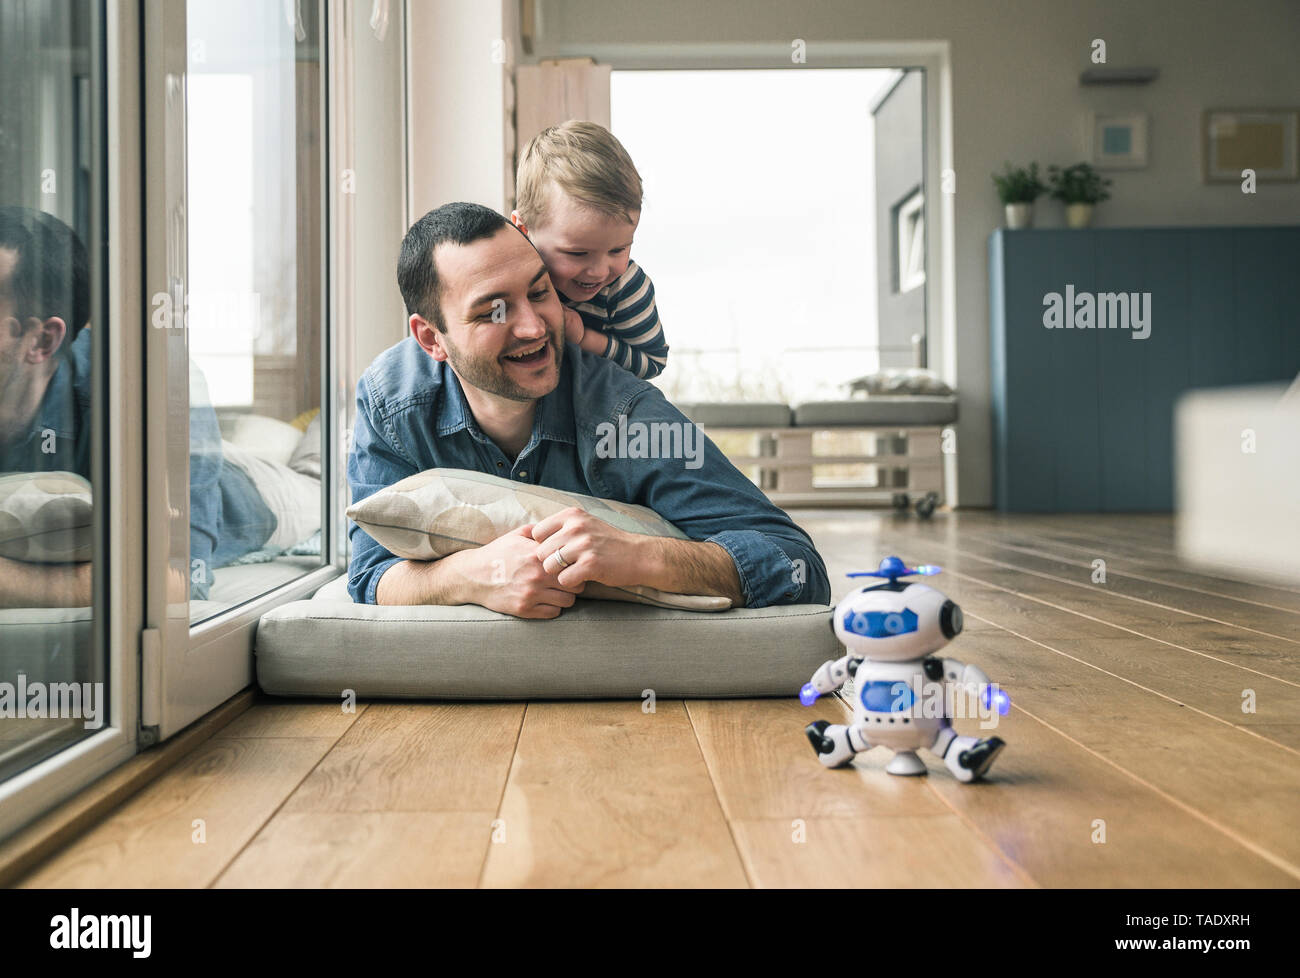 Excited father and son lying on a mattress at home watching a toy robot Stock Photo